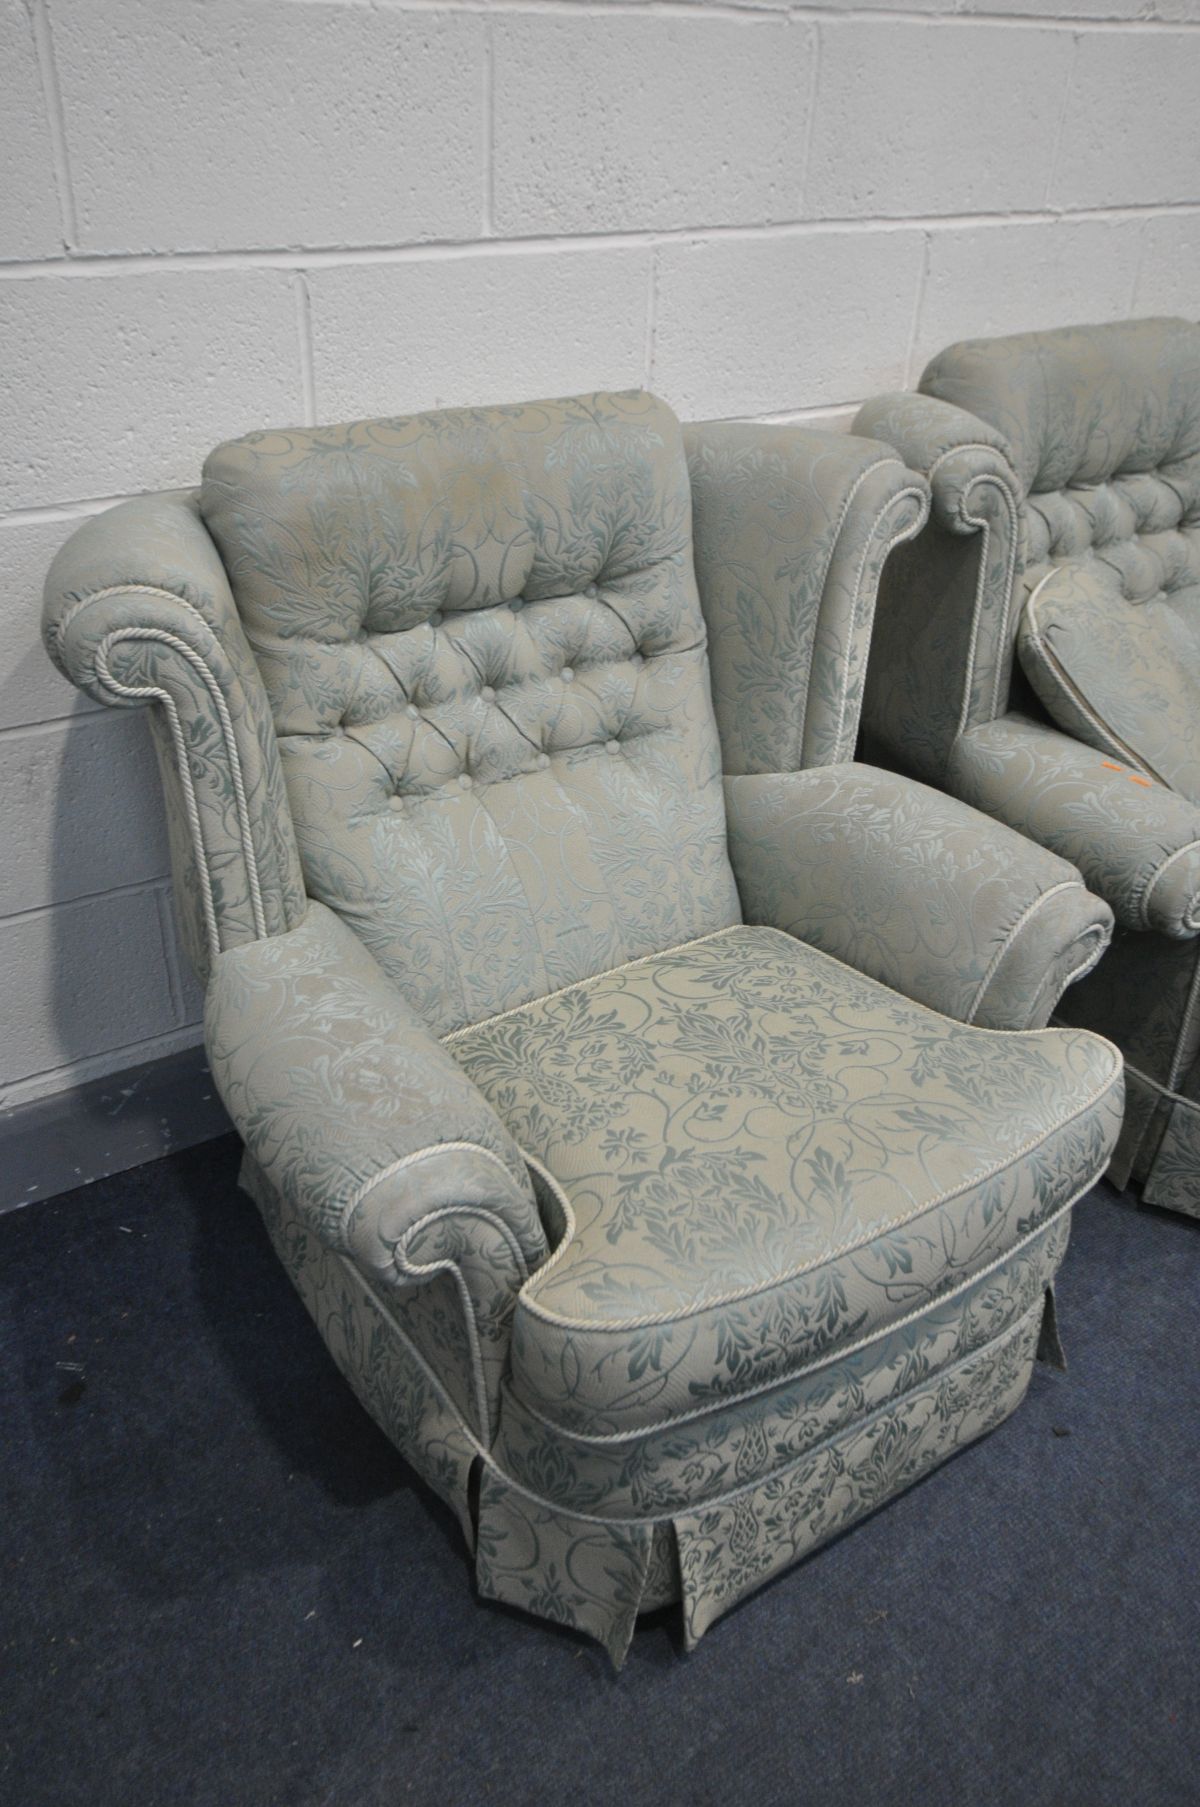 A FLORAL GREEN UPHOLSTERED LOUNGE SUITE, comprising a three seater sofa, pair of armchairs and a - Image 3 of 3